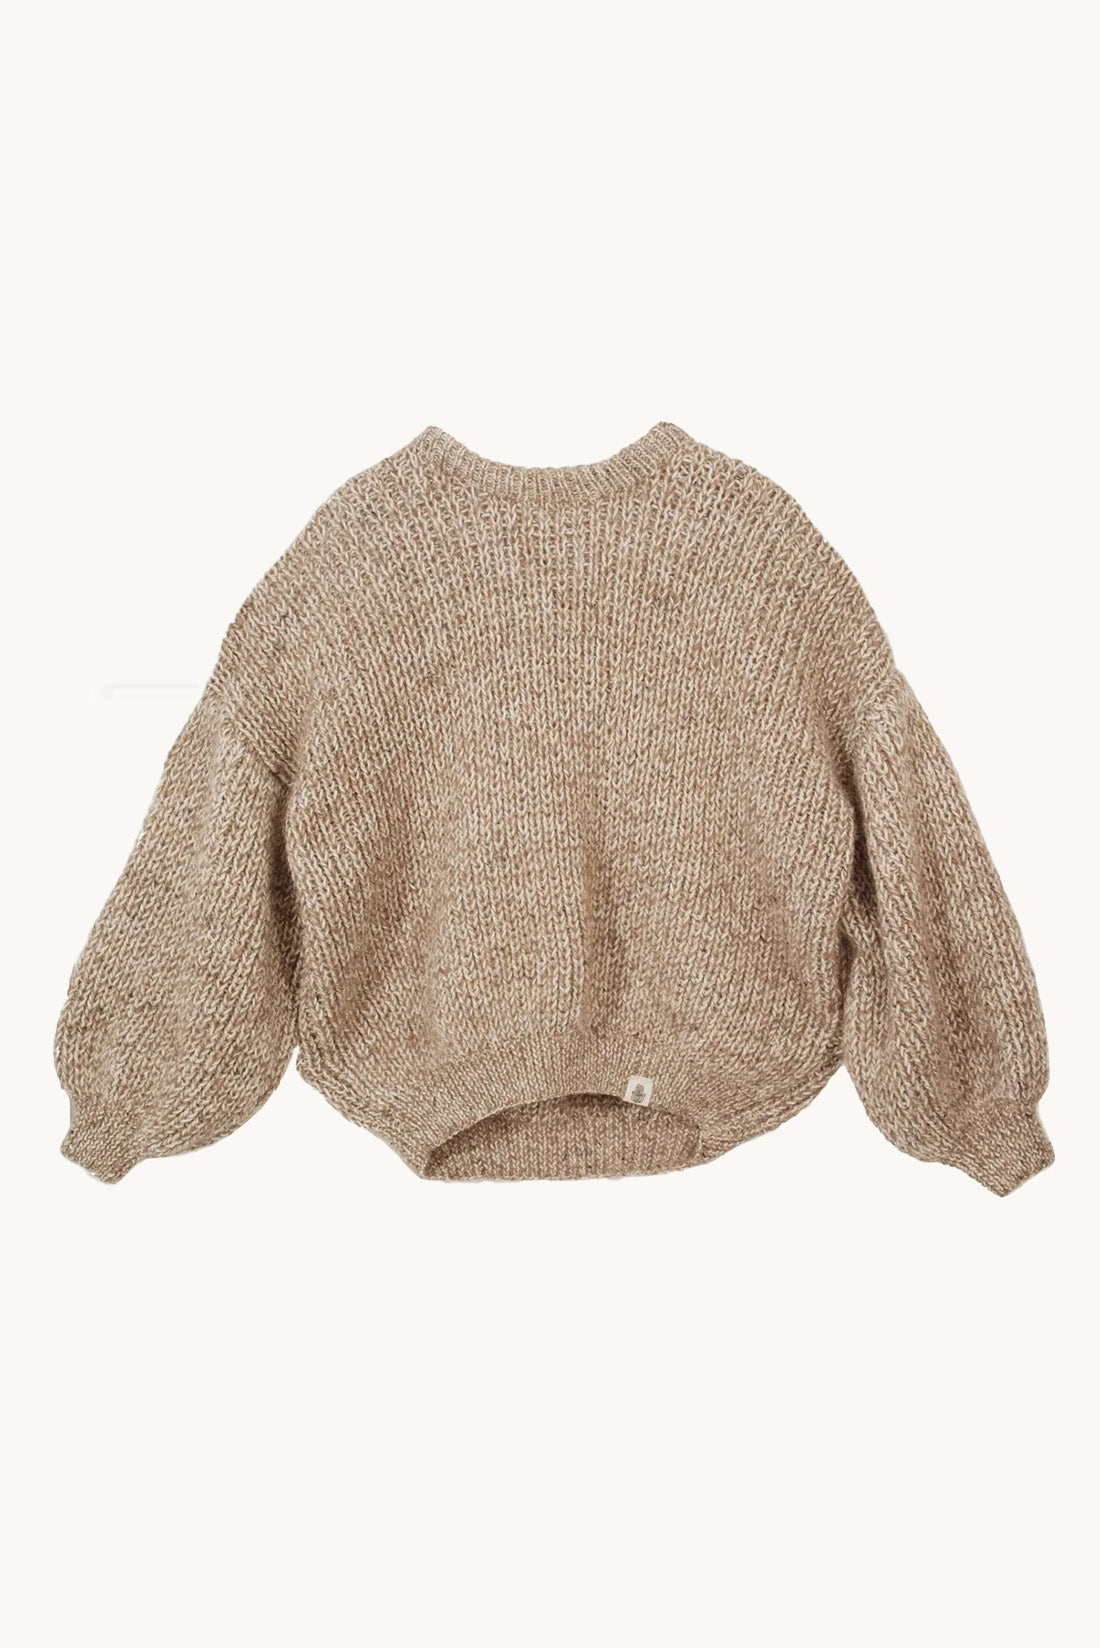 Baloon Salt and Pepper Sweater